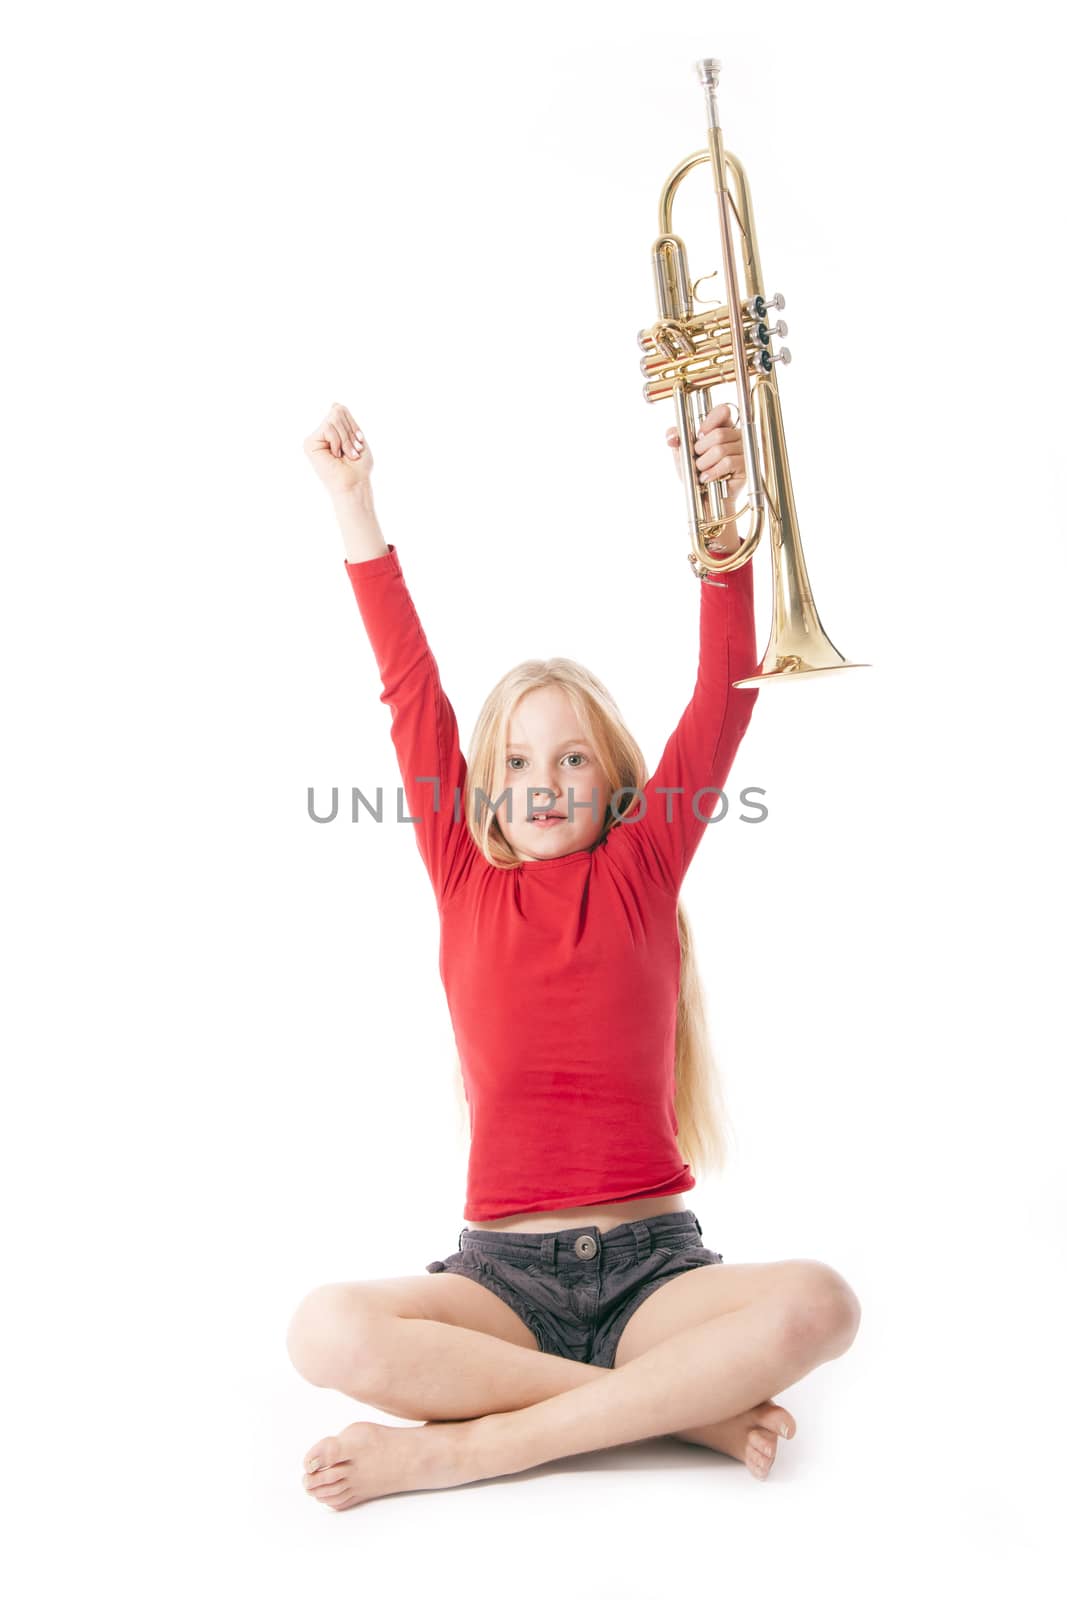 young girl in red holding trumpet in the air against white background